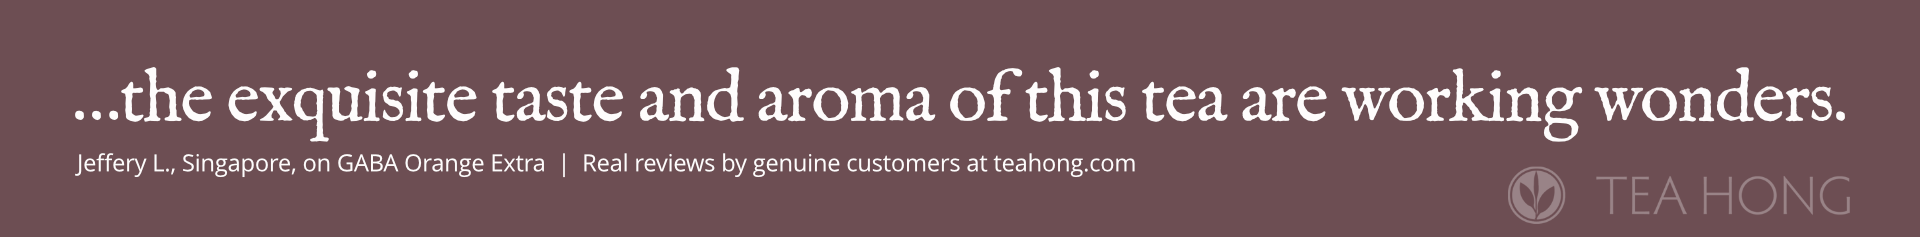 Customer review on GABA Orange Extra, a special Taiwan oolong